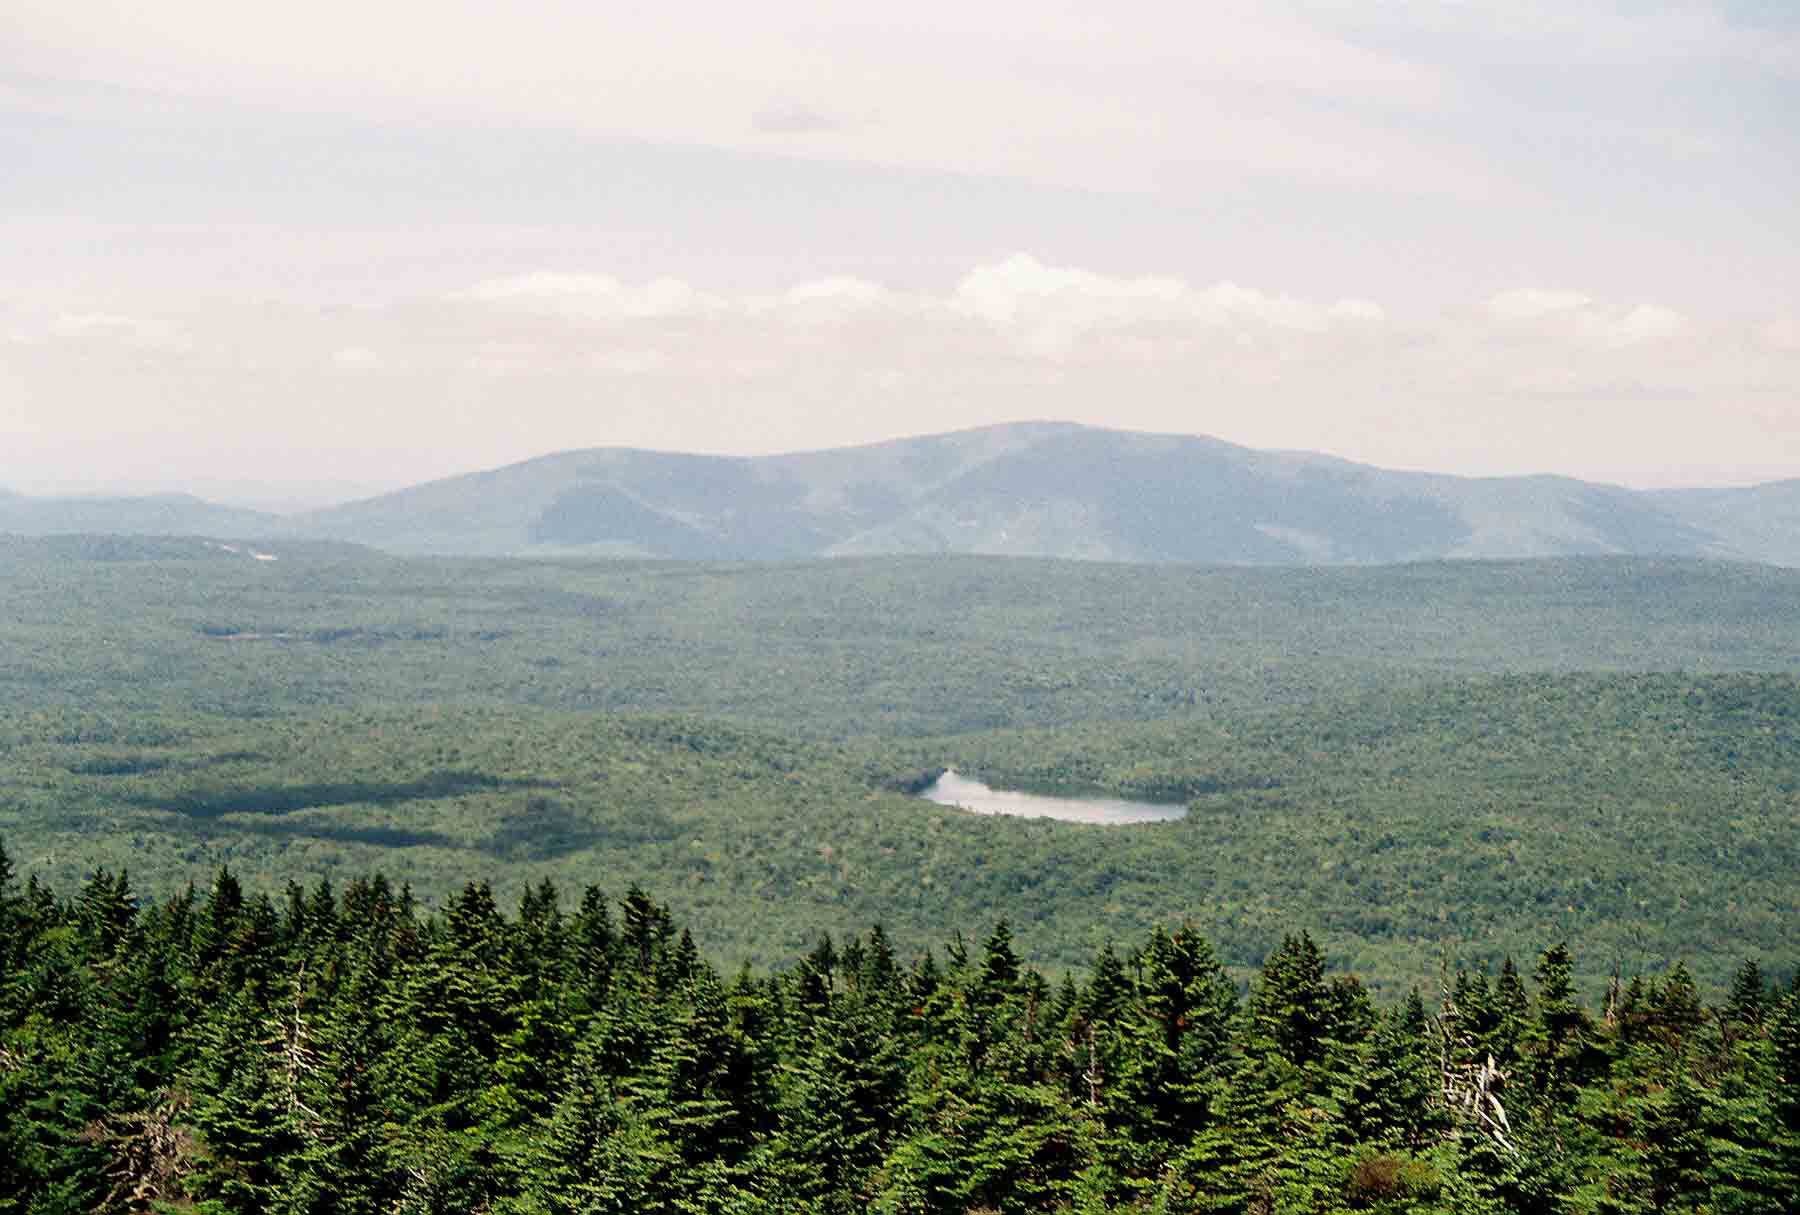 mm 13.7 - View to west from Stratton Firetower. Lake visible is Statton Pond. Though not visible there is a sharp dropoff at the far side of the plateau to the Valley of Vermont. The mountains visible are the Taconics on the west side of the valley. Courtesy dlcul@conncoll.edu